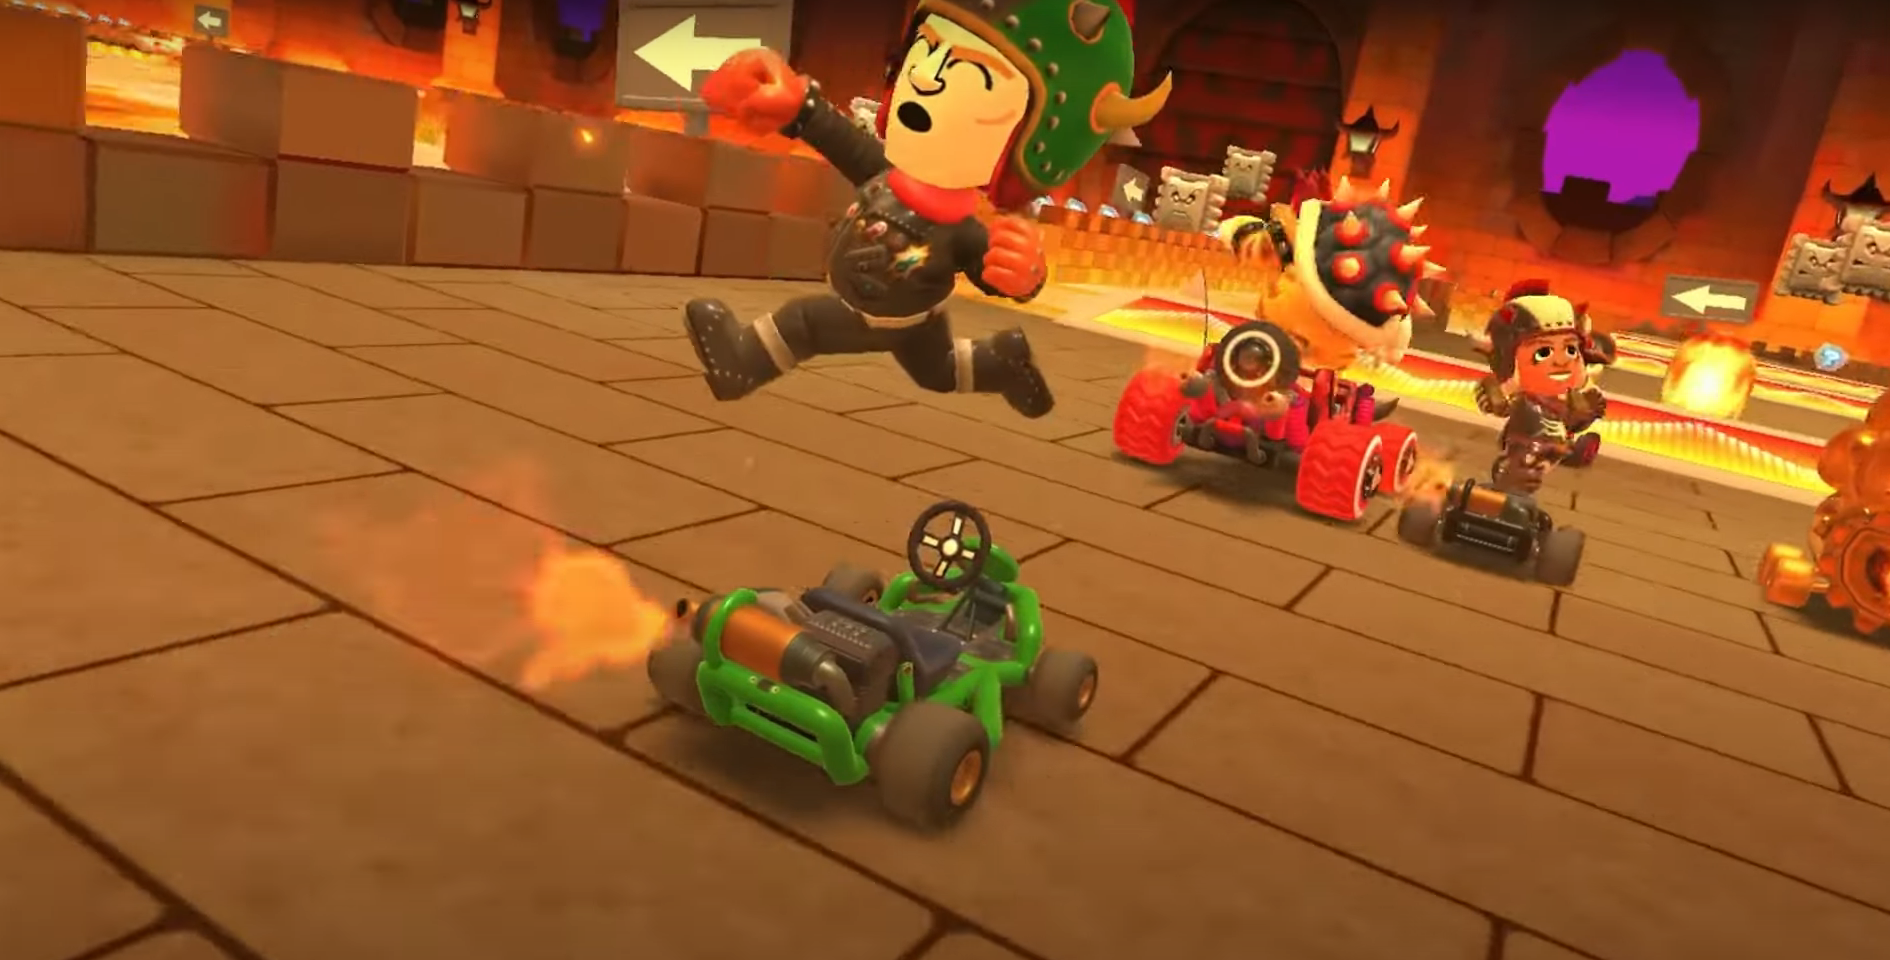 A Mii using the Mario Kart Tour Bowser Tour suit during a race in GBA Bowser Castle 3 